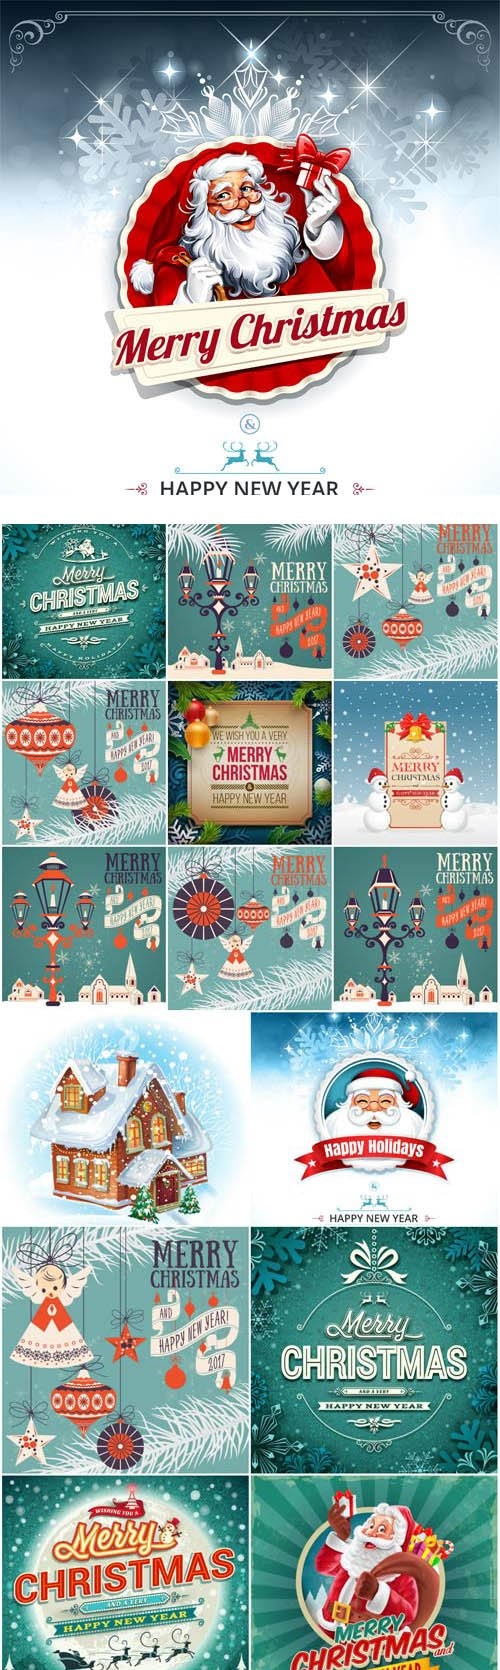 New Year and Christmas illustrations in vector 58